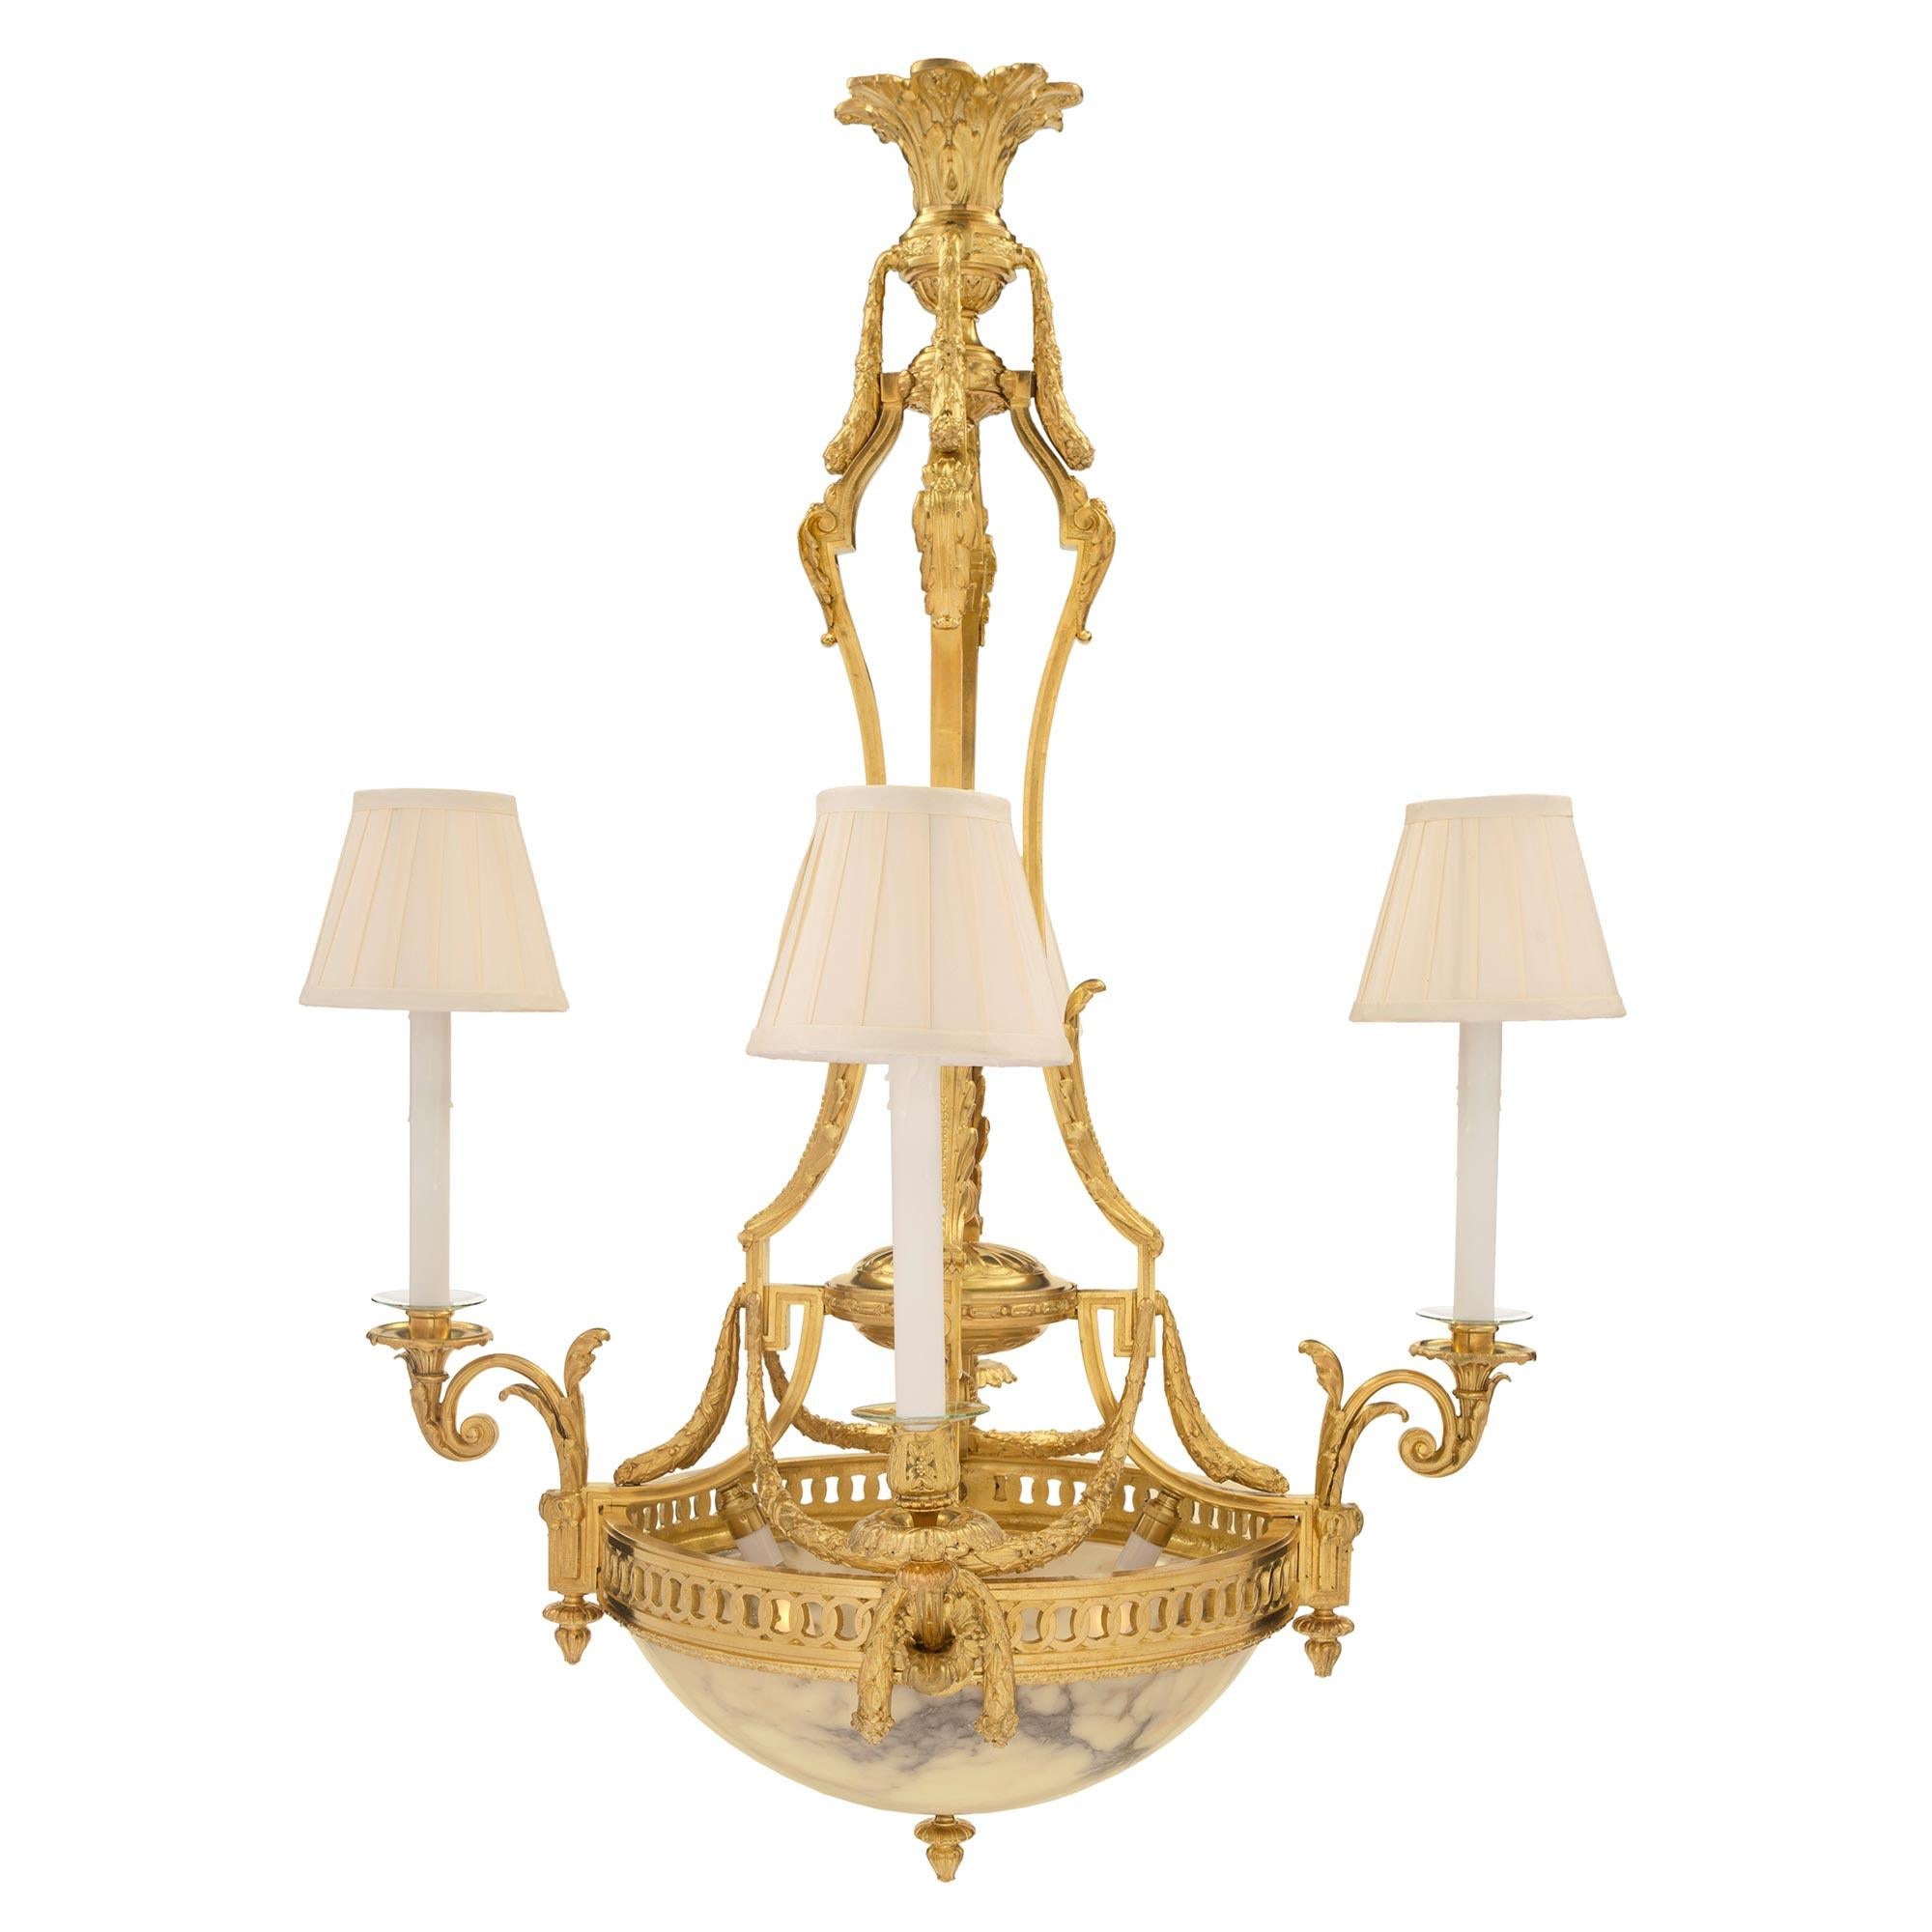 An exquisite French 19th century Louis XVI st. ormolu and alabaster four arm, six light chandelier. The chandelier is centered by a charming bottom ormolu acorn finial below the striking alabaster bowl which houses two interior light bulbs offering